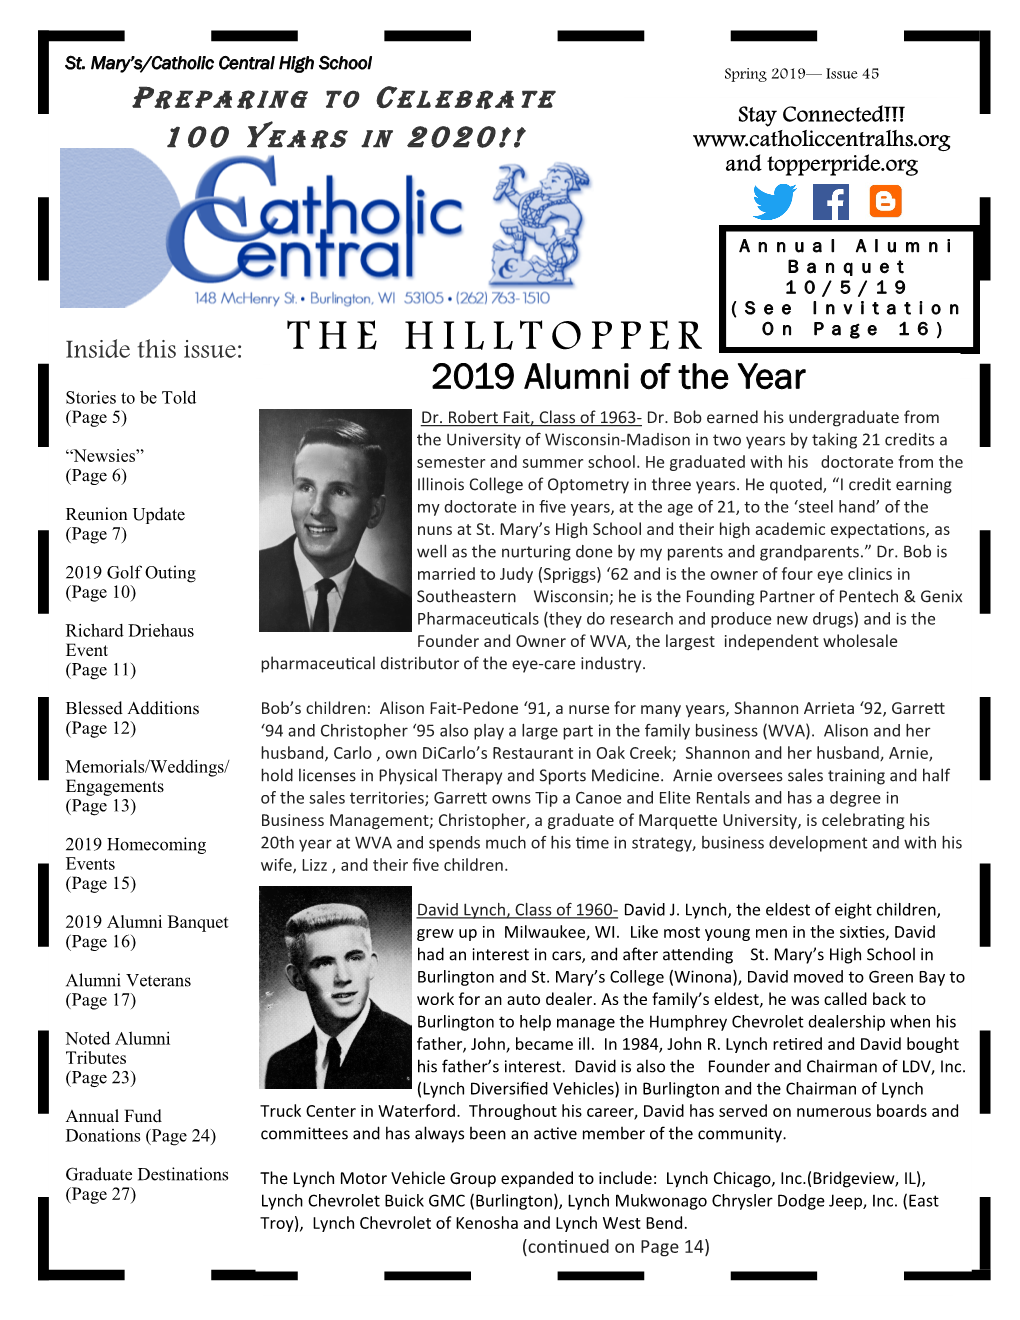 THE HILLTOPPER 2019 Alumni of the Year Stories to Be Told (Page 5) Dr